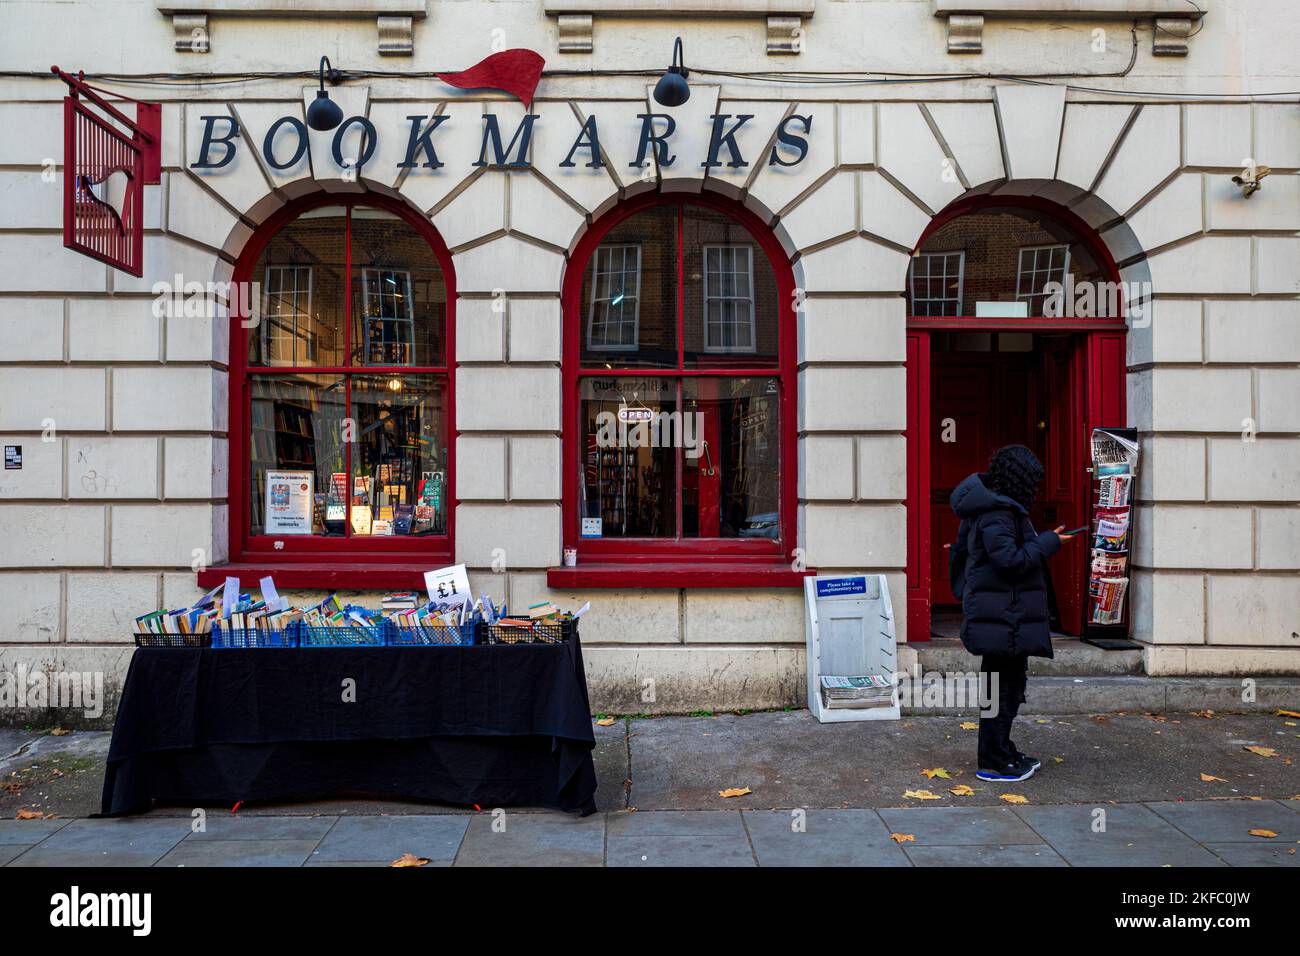 Bookmarks Bookshop 1 Bloomsbury St London - Bookmarks is Britain's largest socialist bookshop, founded in 1973 by the Socialist Workers Party or SWP. Stock Photo